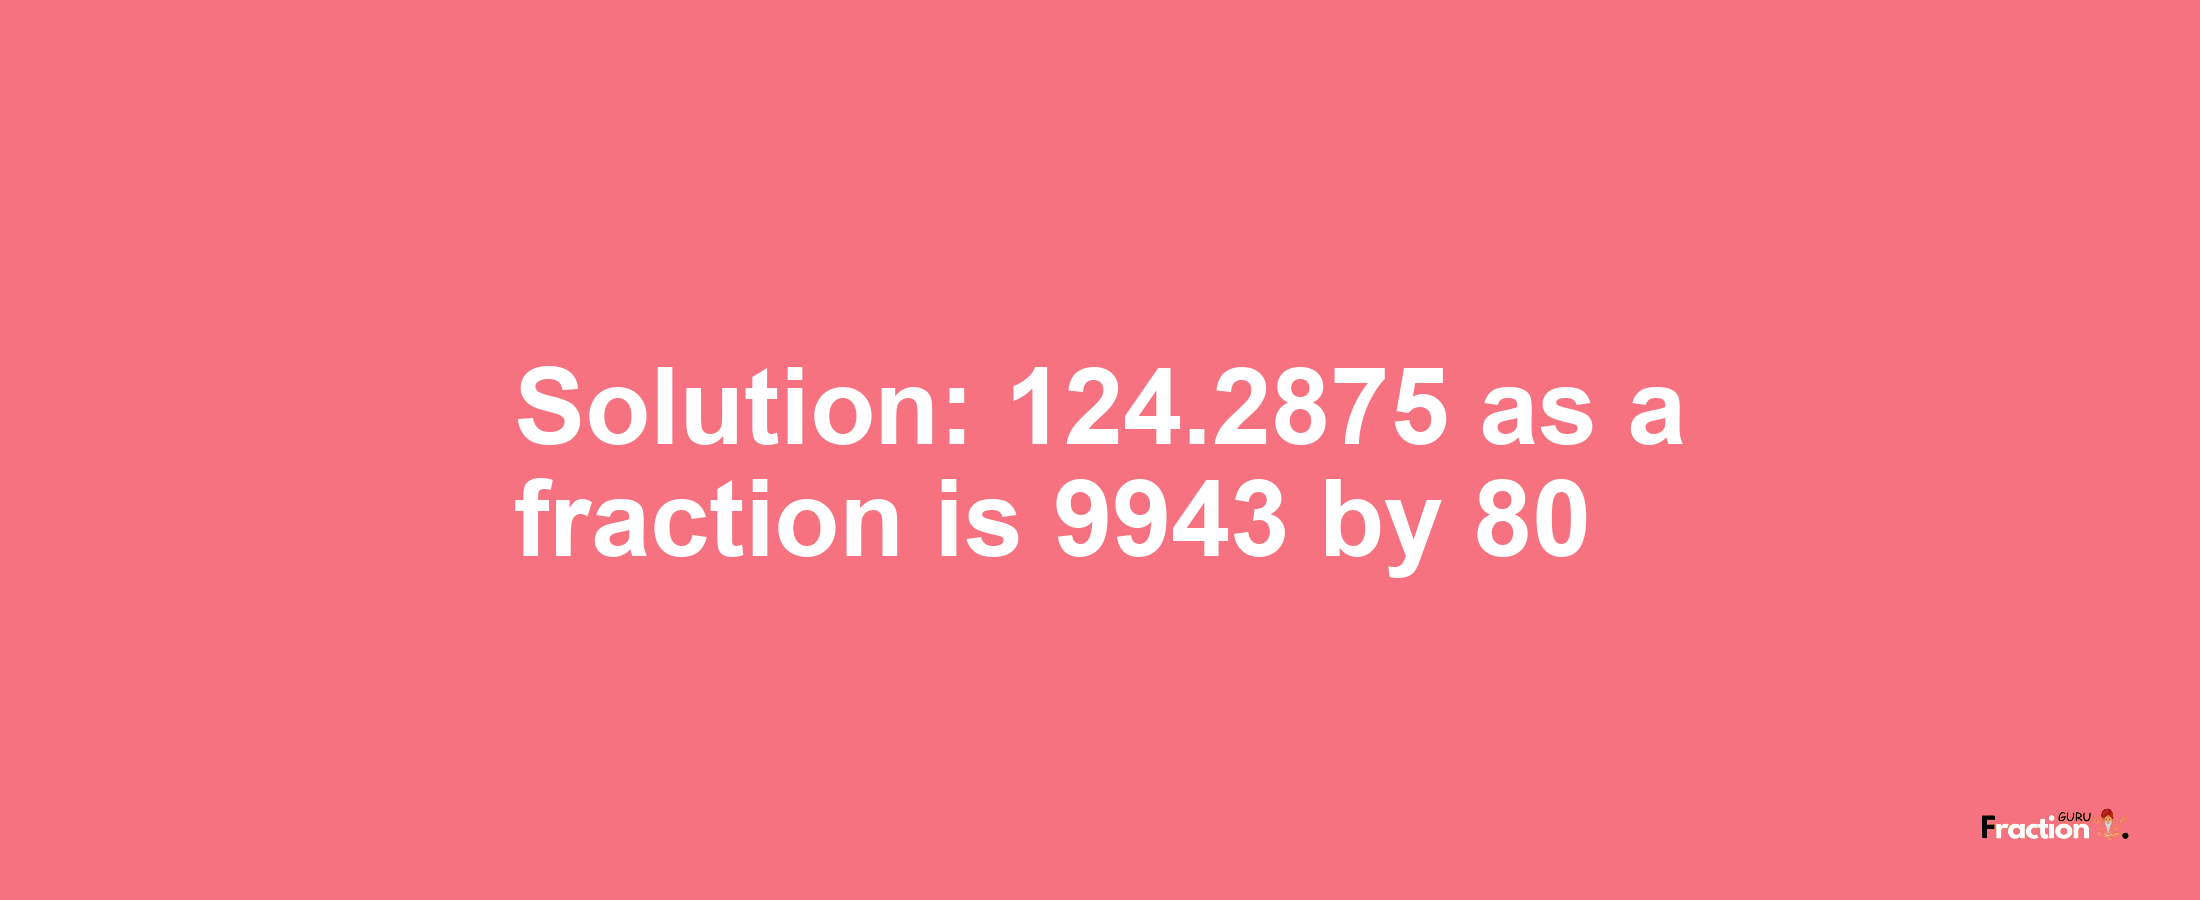 Solution:124.2875 as a fraction is 9943/80